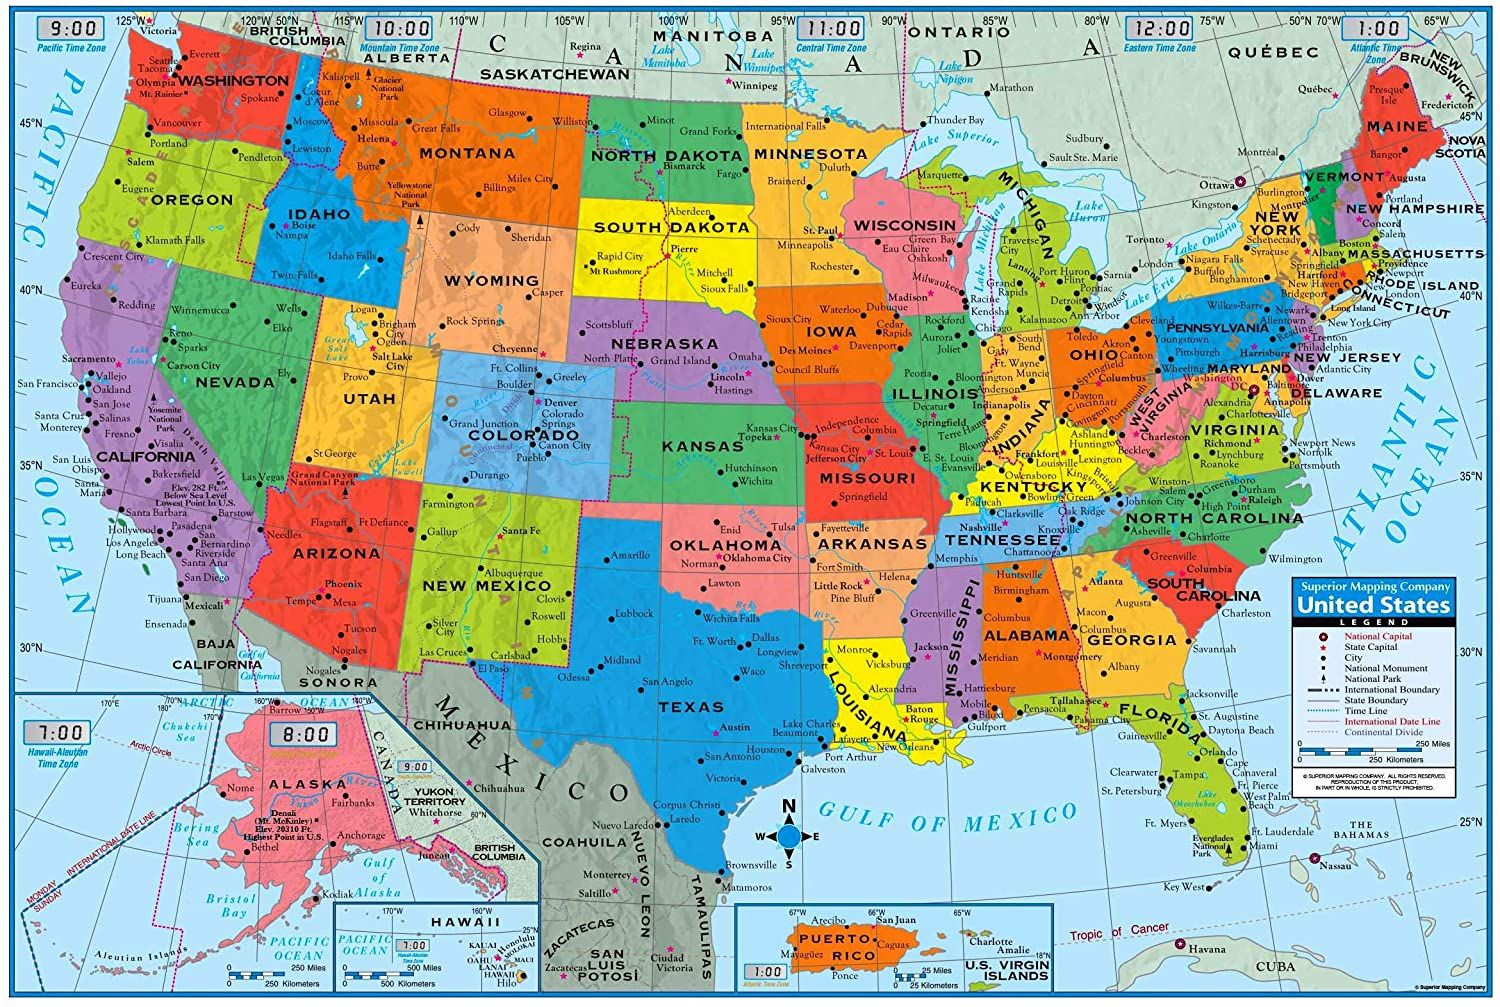 Superior Mapping Company United States Poster Size Wall Map 40 X 28 